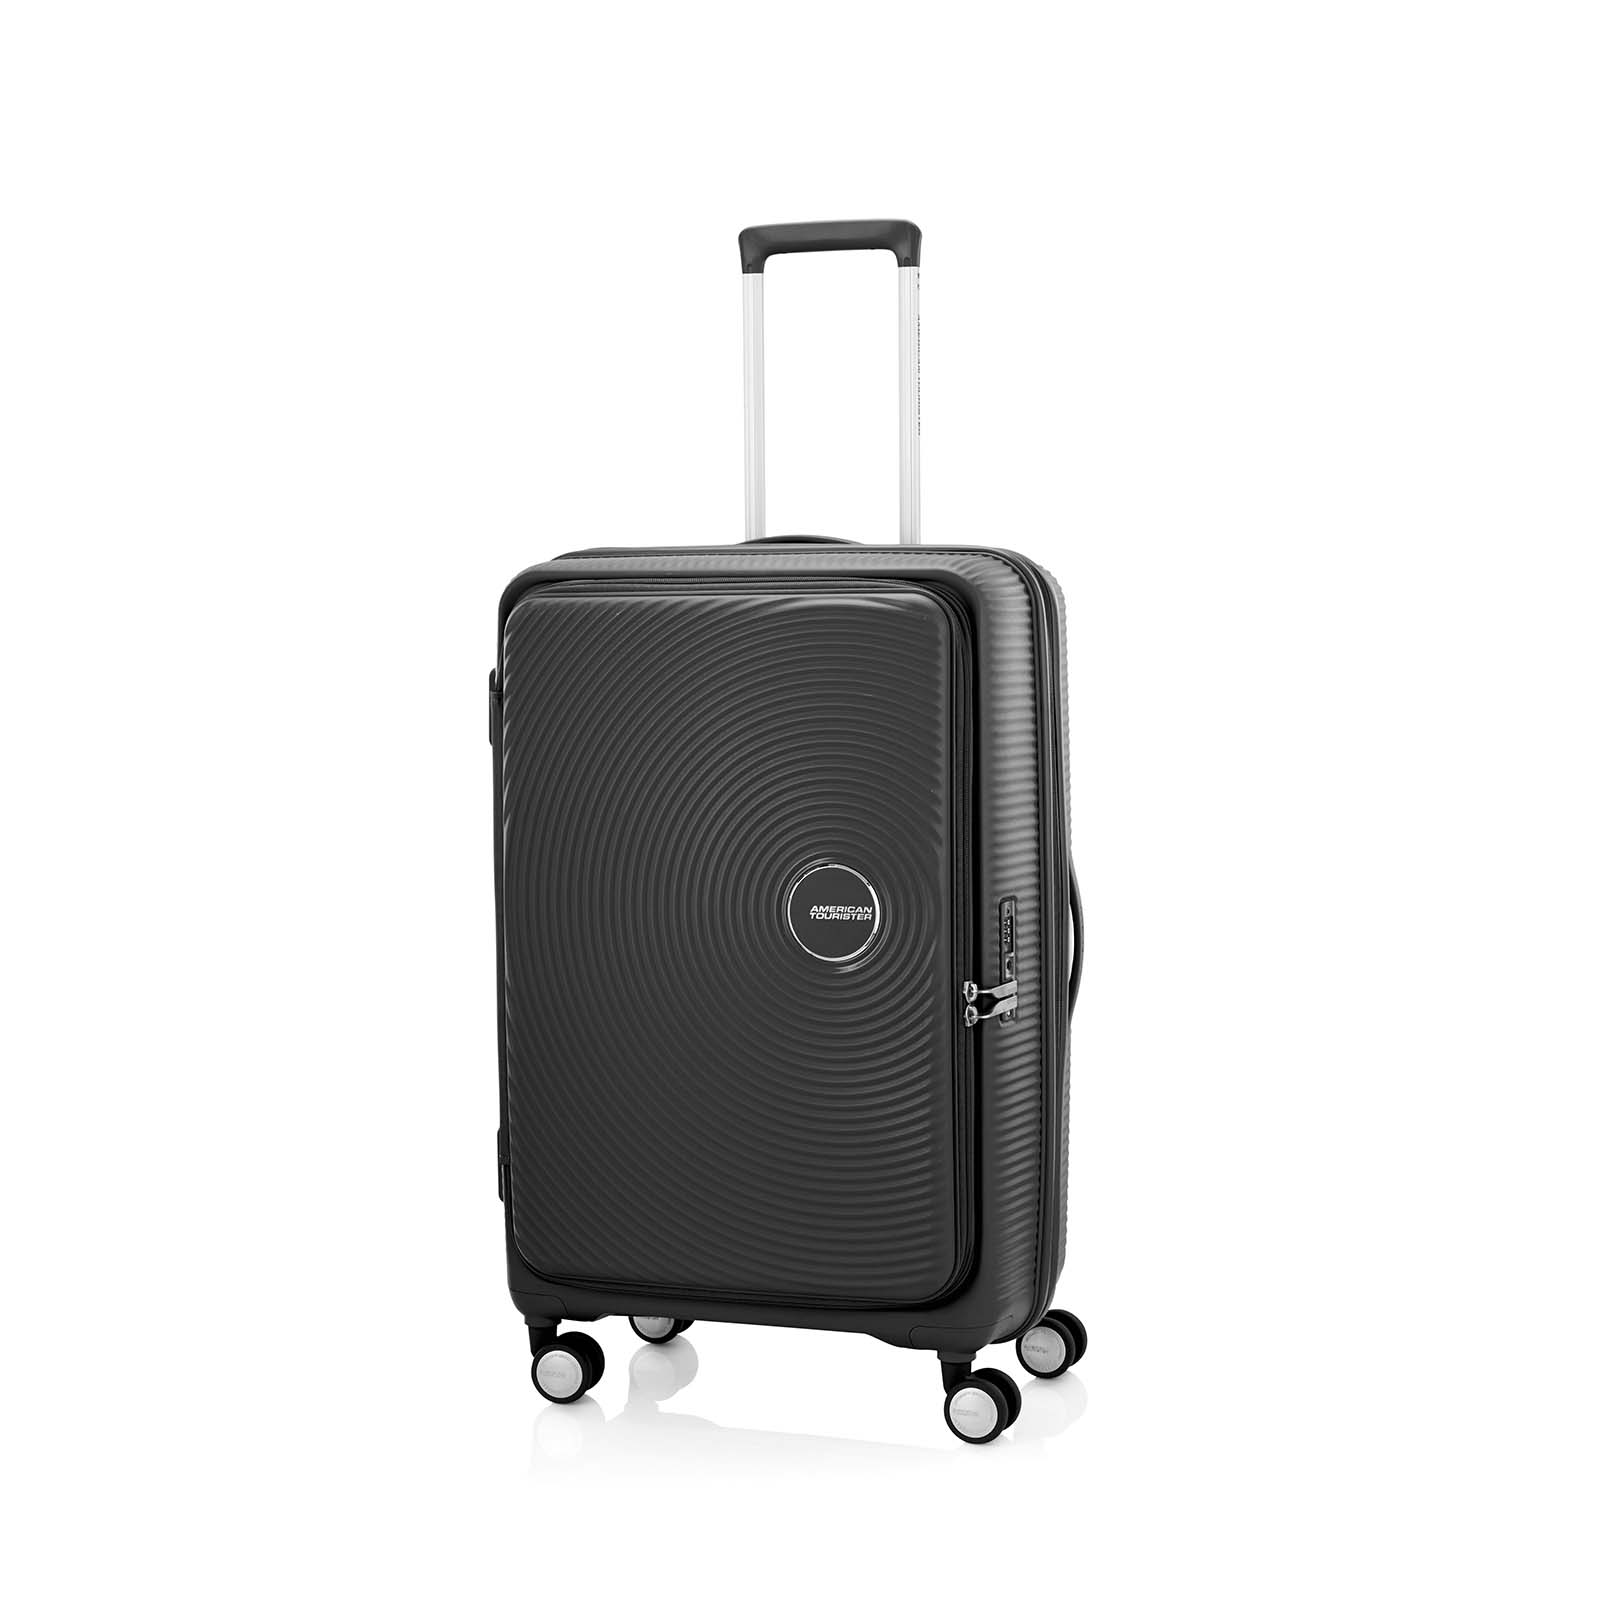 American-Tourister-Curio-Book-Opening-75cm-Suitcase-Black-Front-Angle